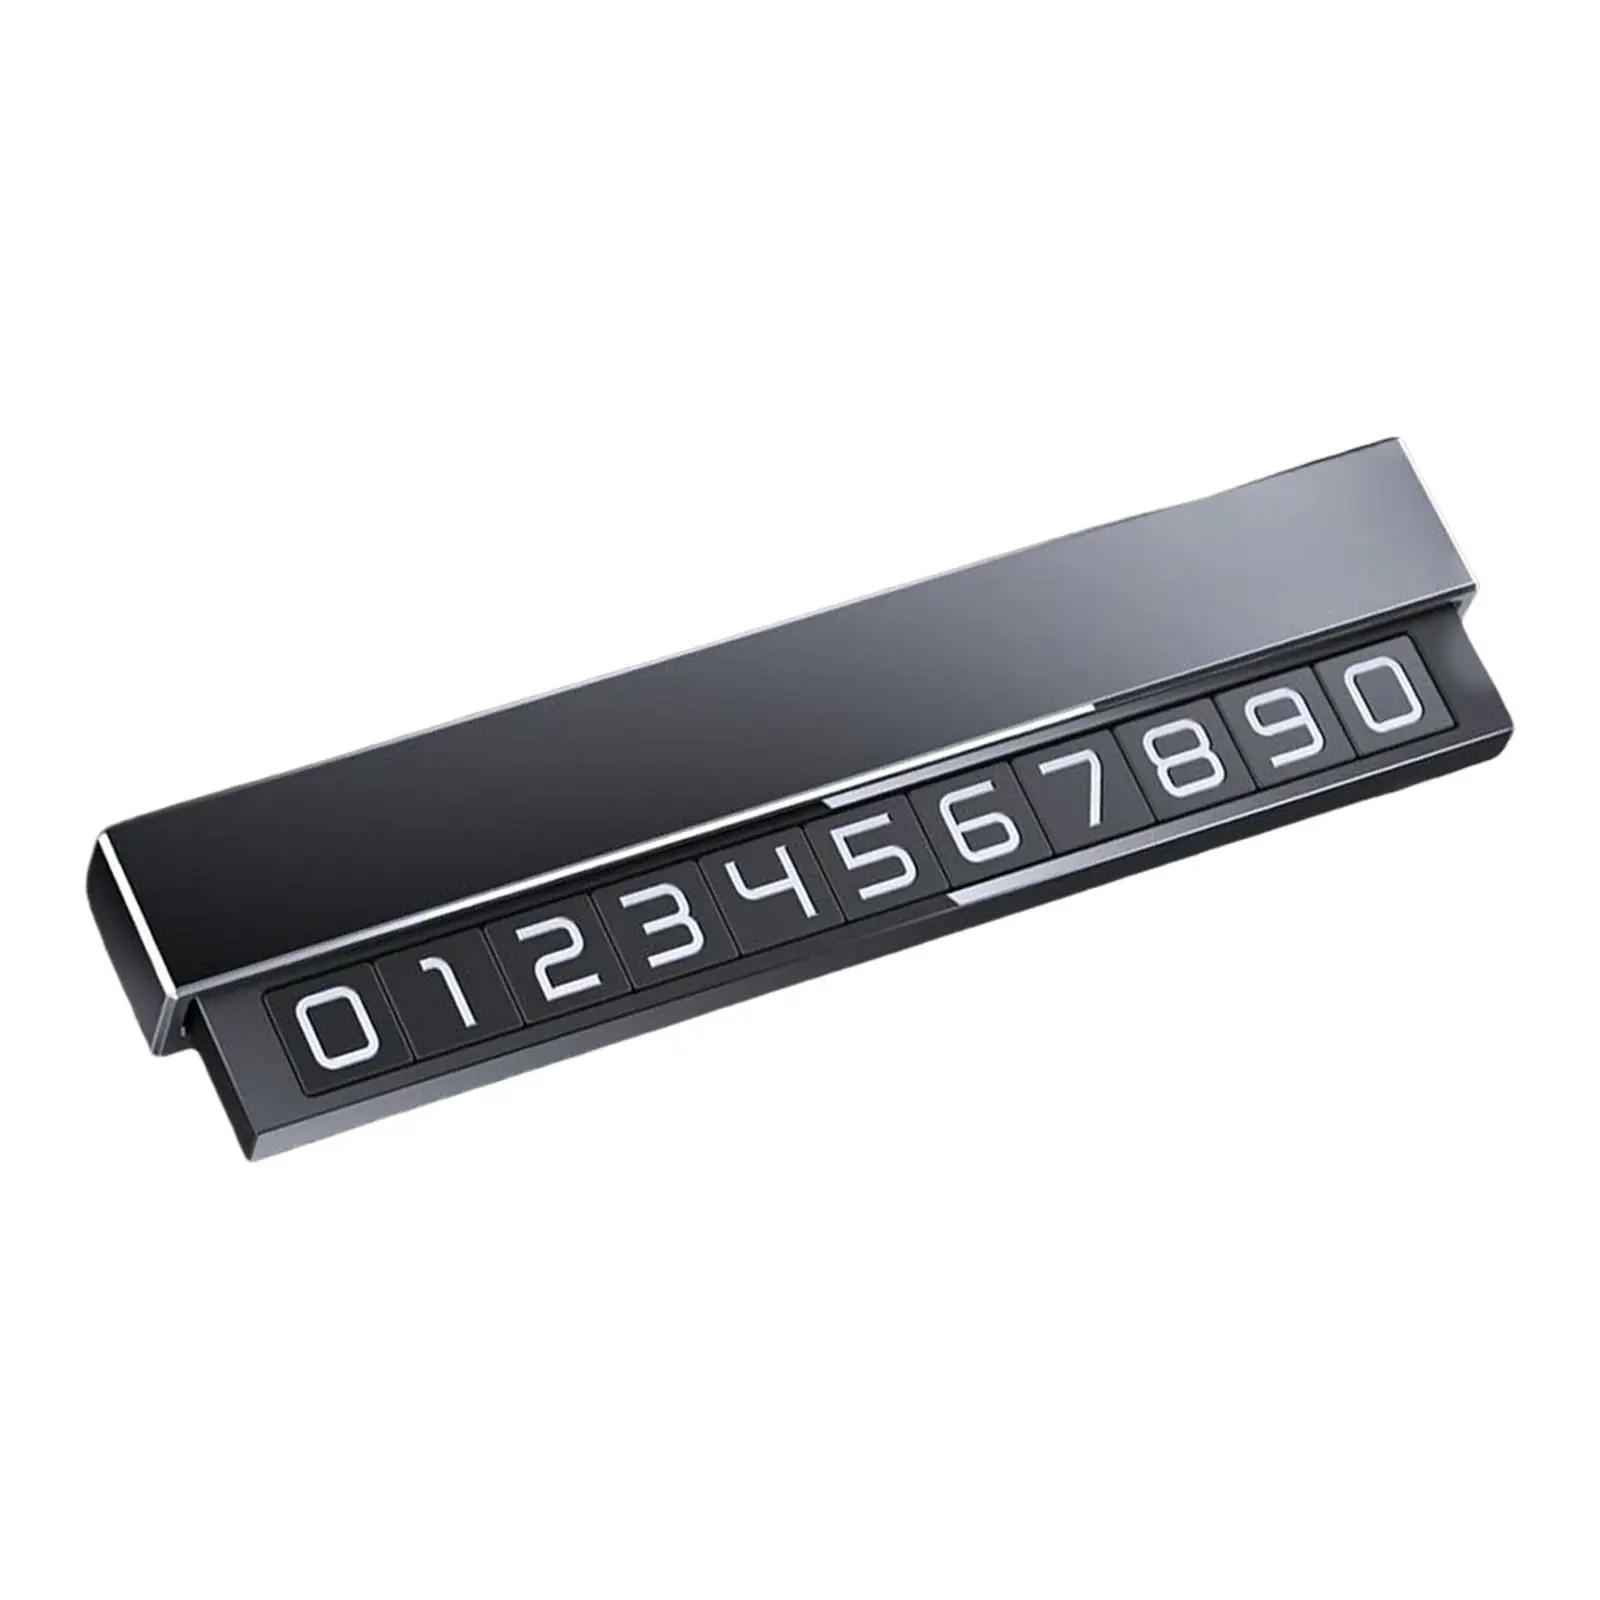 Automobile Parking Number Sign Car Interior Accessories Hidden Moving Notification Phone Number Card for Cars Dashboard